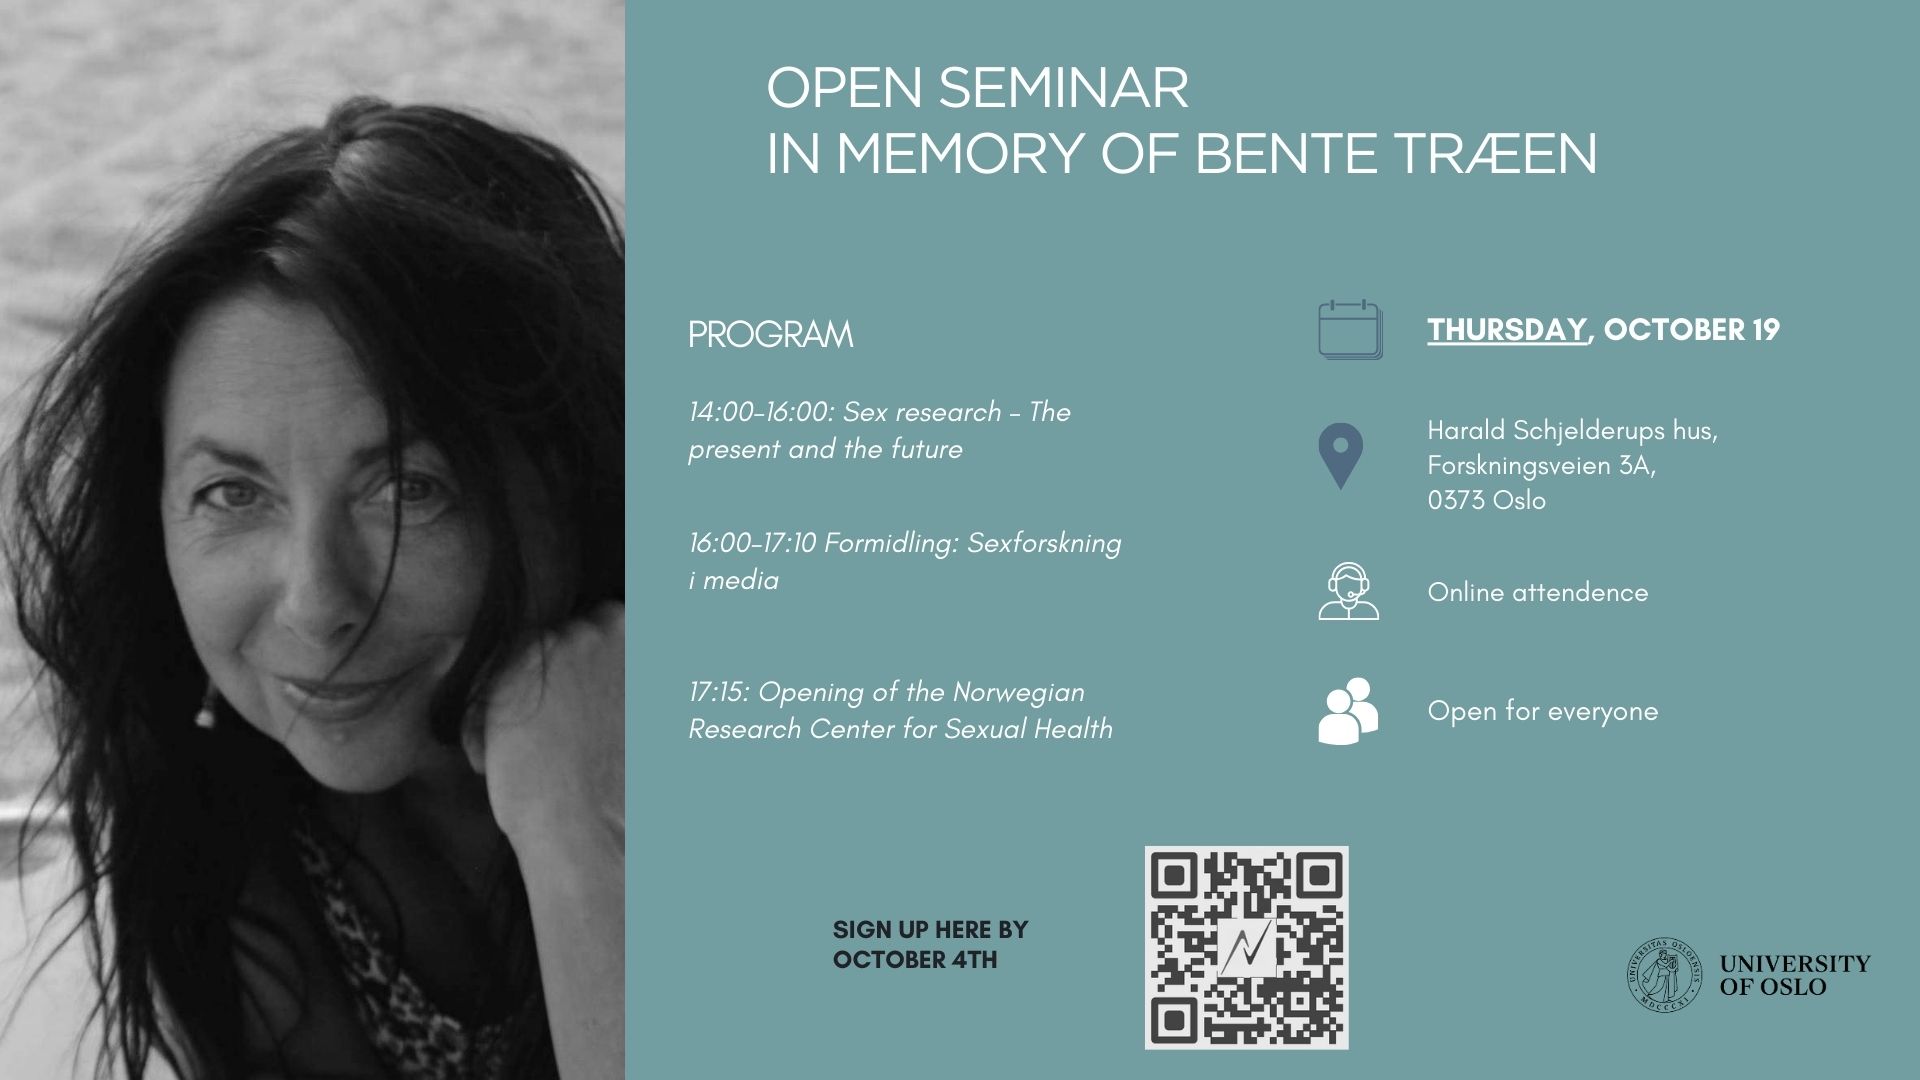 Invitation flyer with a picture of Bente Træen